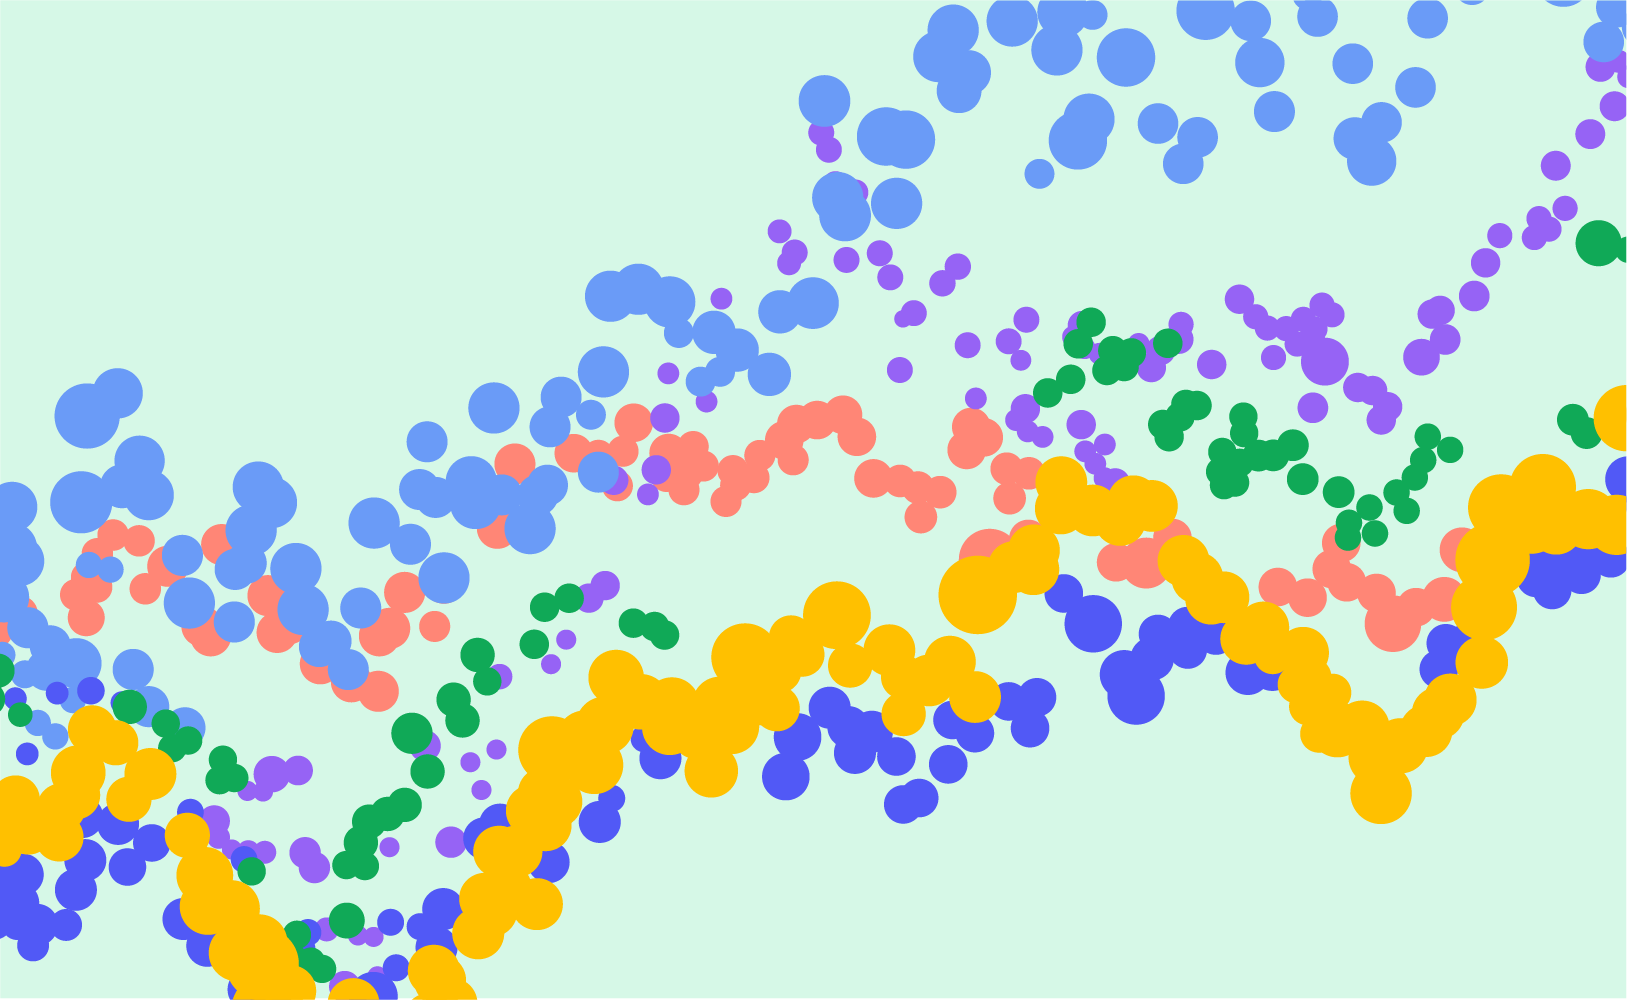 Labeled Scatter Plots and Bubble Charts in R